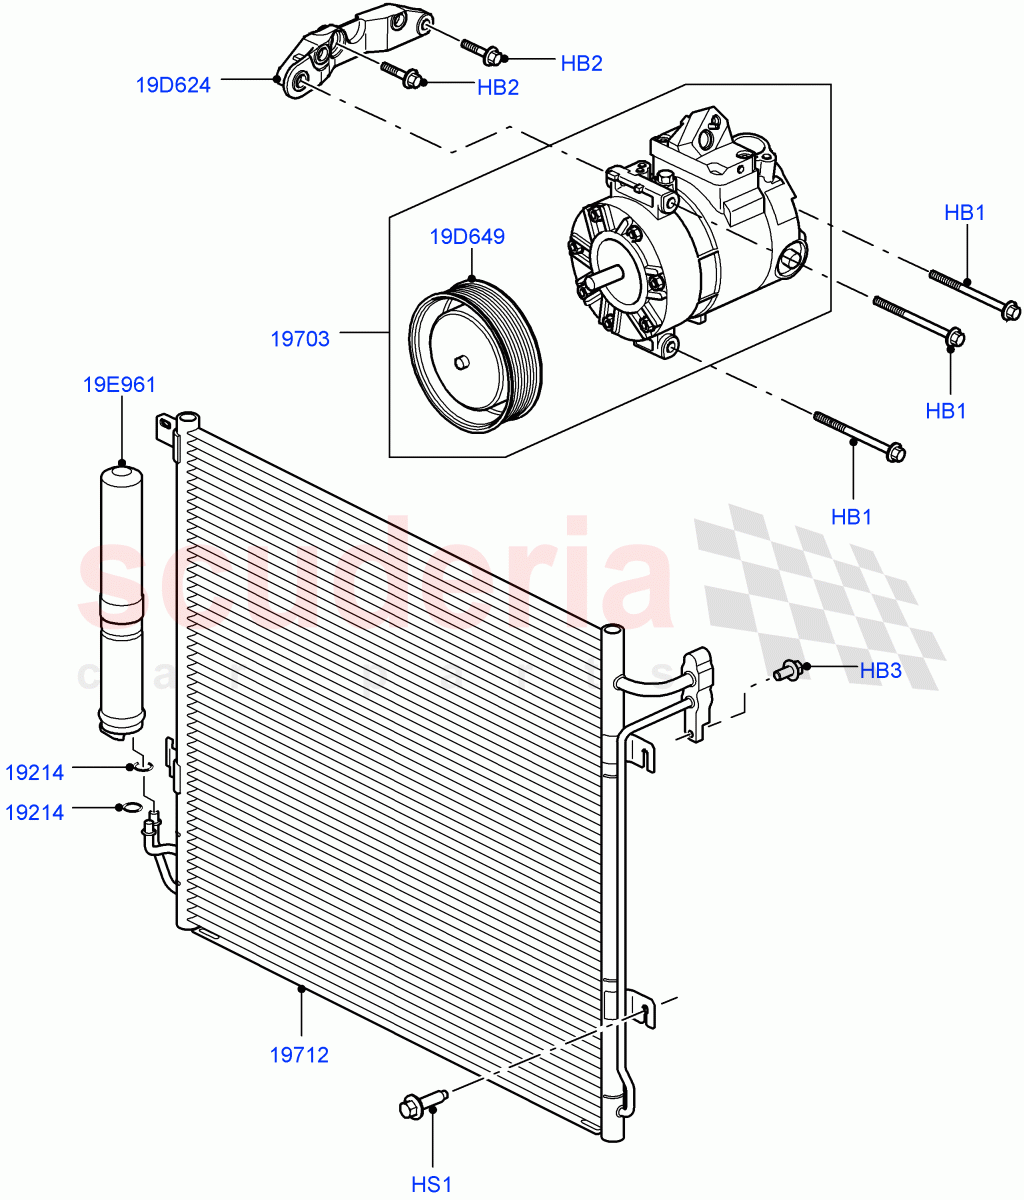 Air Conditioning Condensr/Compressr(Lion Diesel 2.7 V6 (140KW))((V)FROMAA000001) of Land Rover Land Rover Discovery 4 (2010-2016) [2.7 Diesel V6]